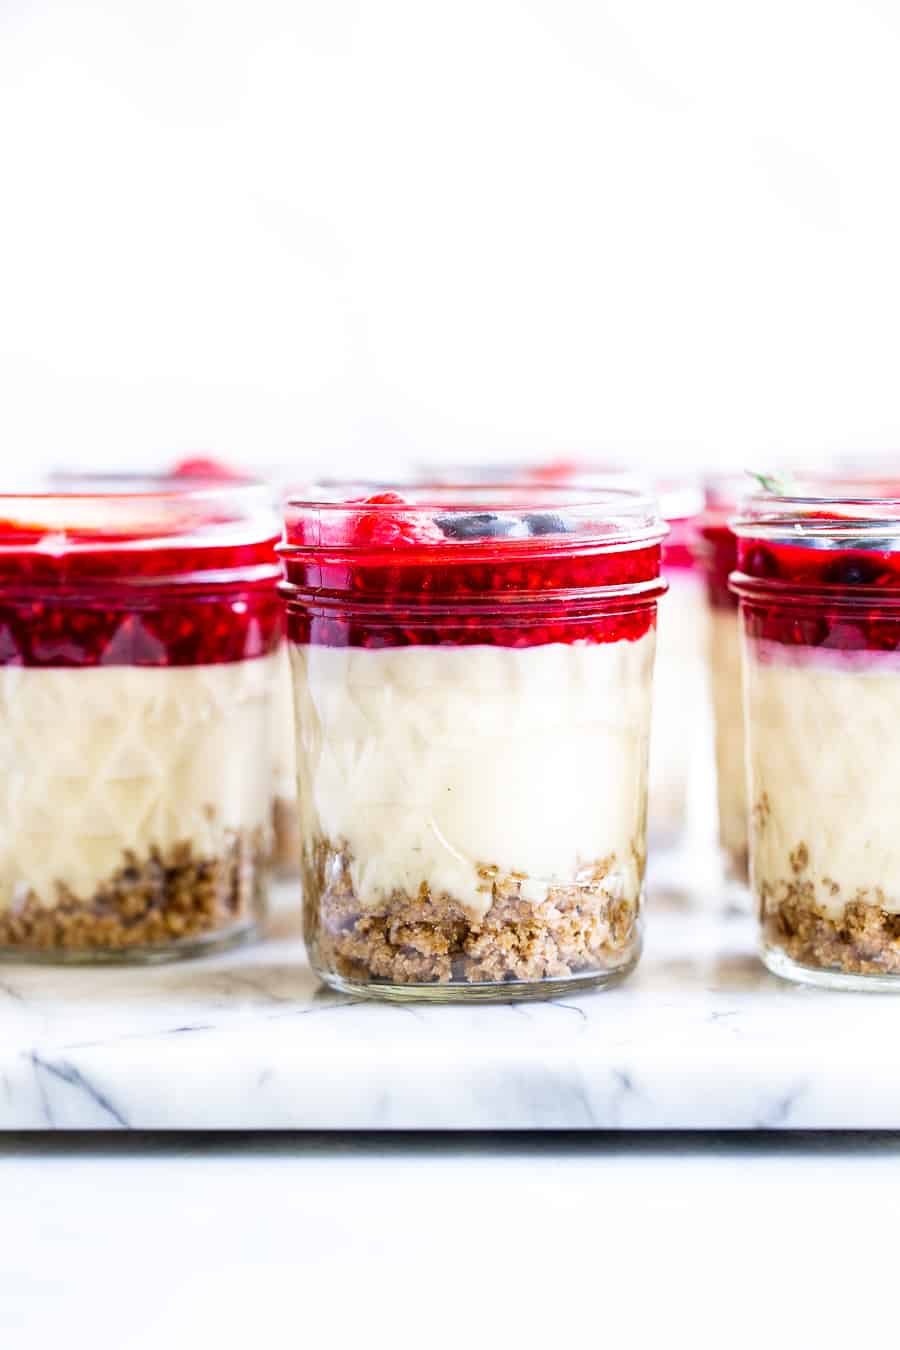 These fun single serve no bake cheesecake jars are made with real food ingredients and are completely dairy and soy free!  They’re perfect to make ahead of time for an easy and delicious healthy dessert you can grab anytime.  Kid friendly, paleo, vegan, and easy to make. #vegan #paleo #cheesecake #healthydessert